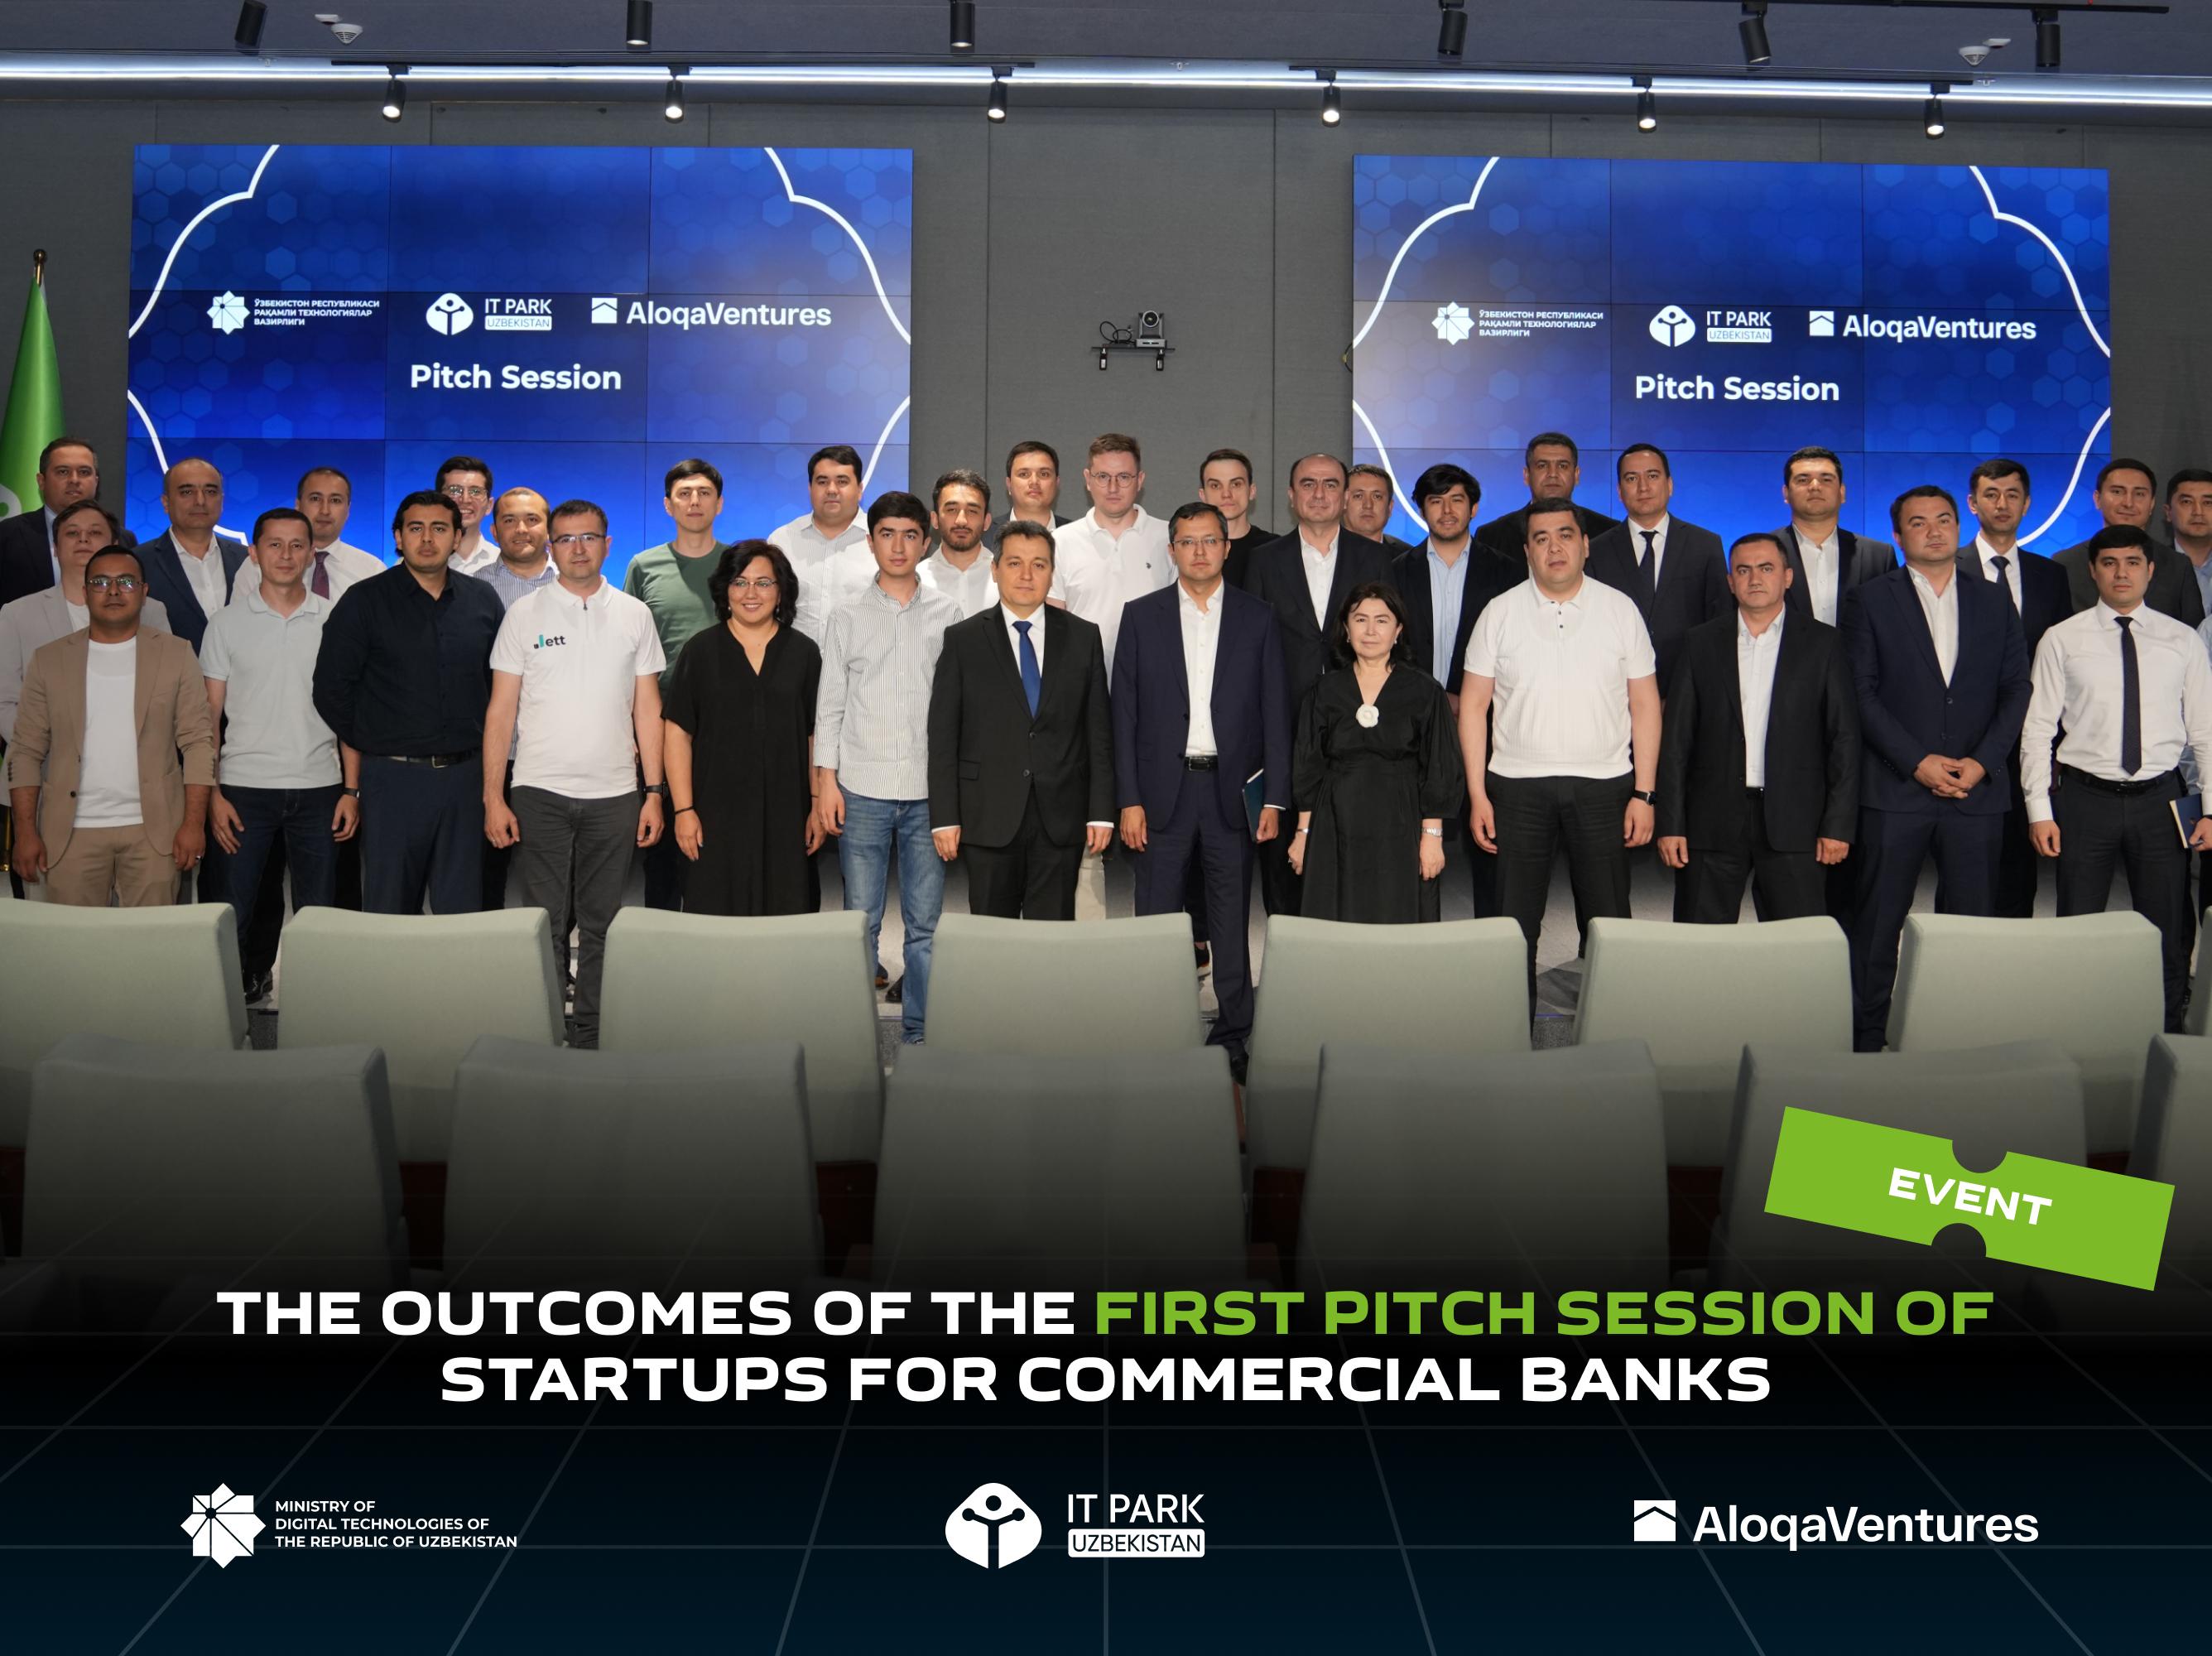 The outcomes of the first pitch session of startups for commercial banks